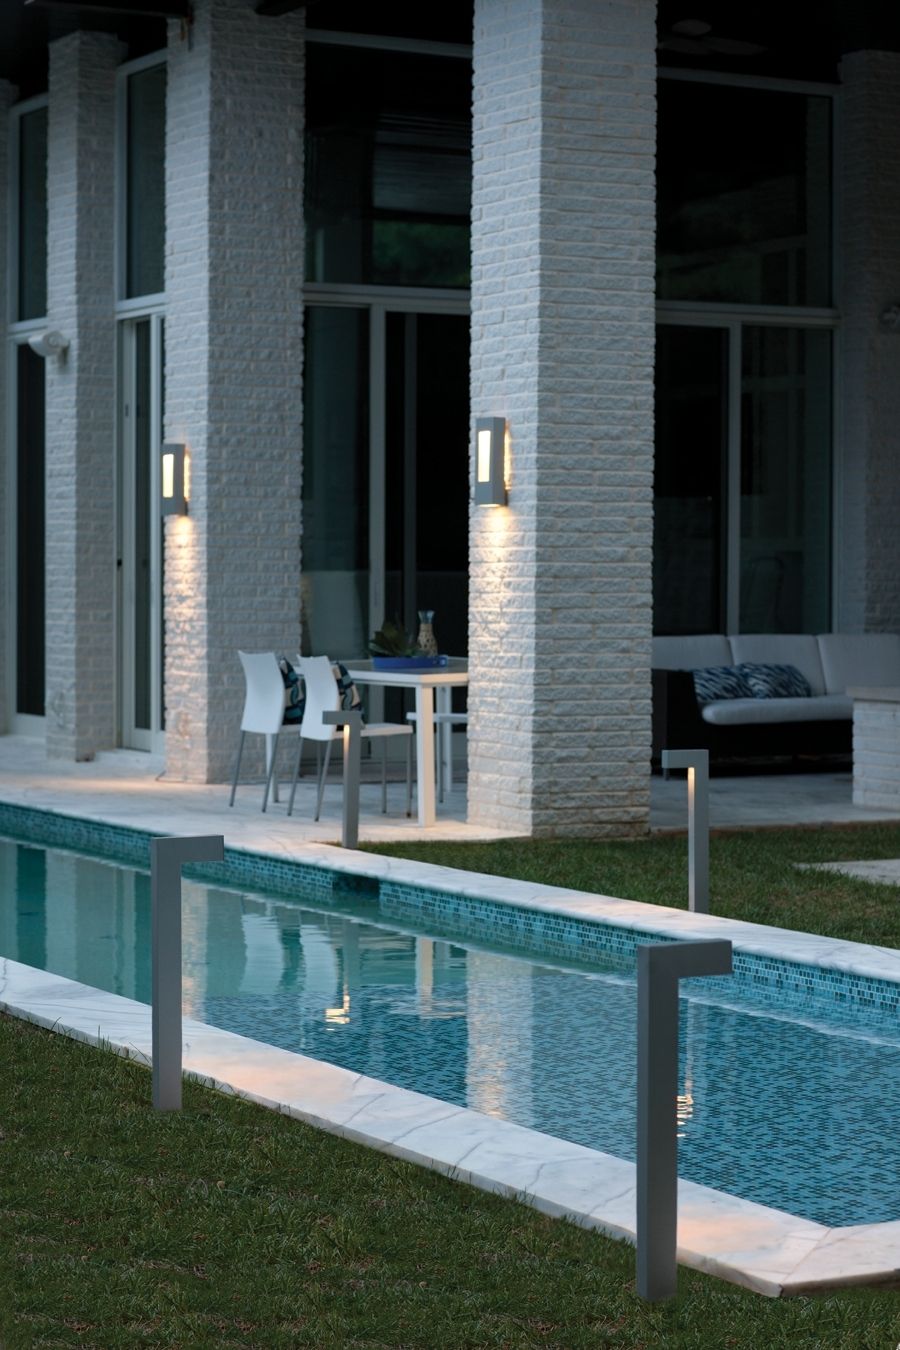 Hinkley Lighting Atlantis Collection Led Outdoor Lanterns And Pertaining To Hinkley Outdoor Wall Lighting (View 11 of 15)